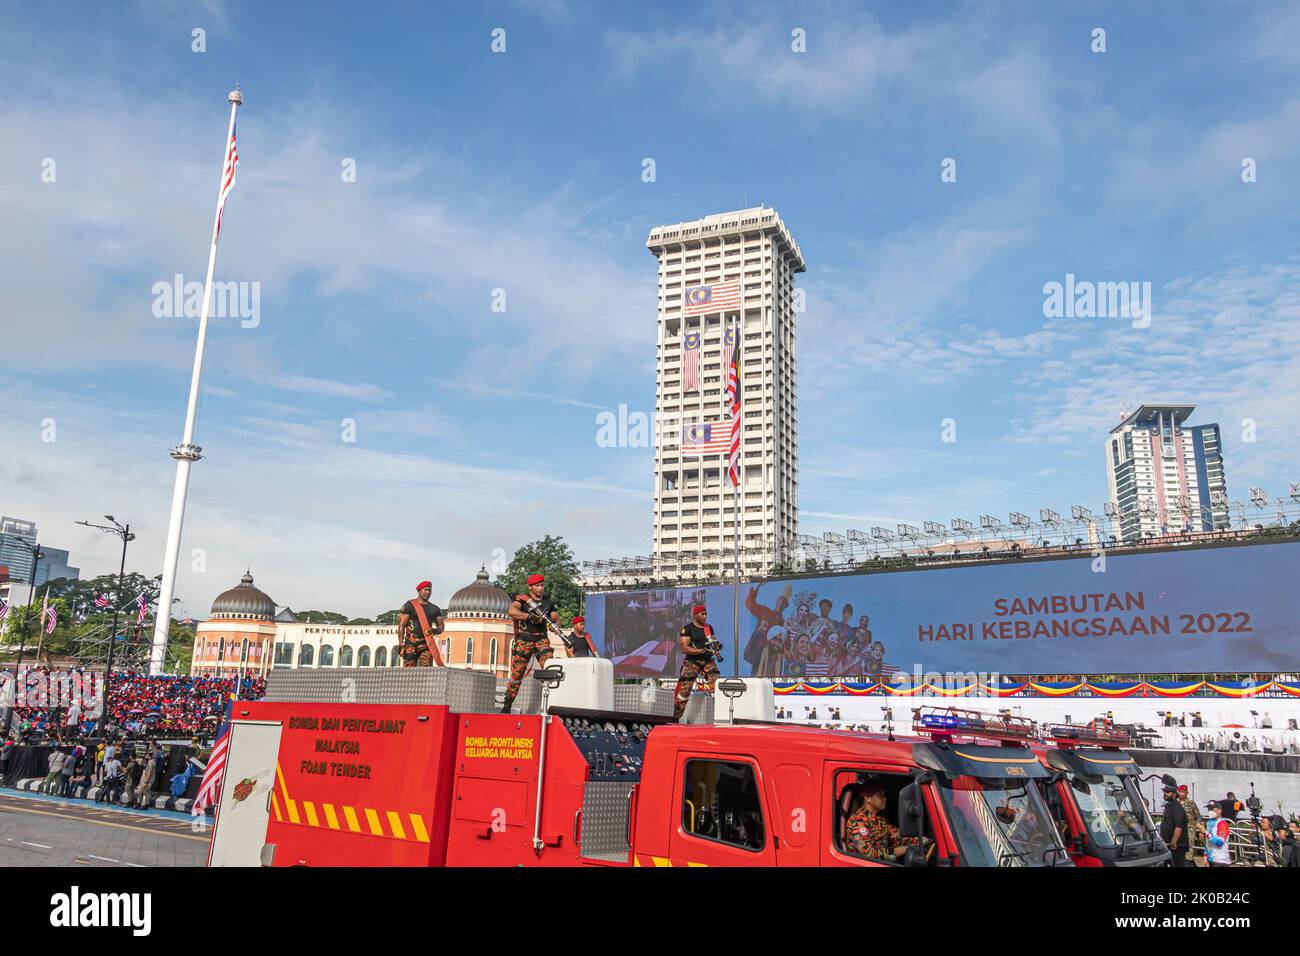 Malaysian firefighter and rescue personals posing on fire and rescue truck during 65 Malaysia National Day Parade in Kuala Lumpur, Malaysia. Stock Photo